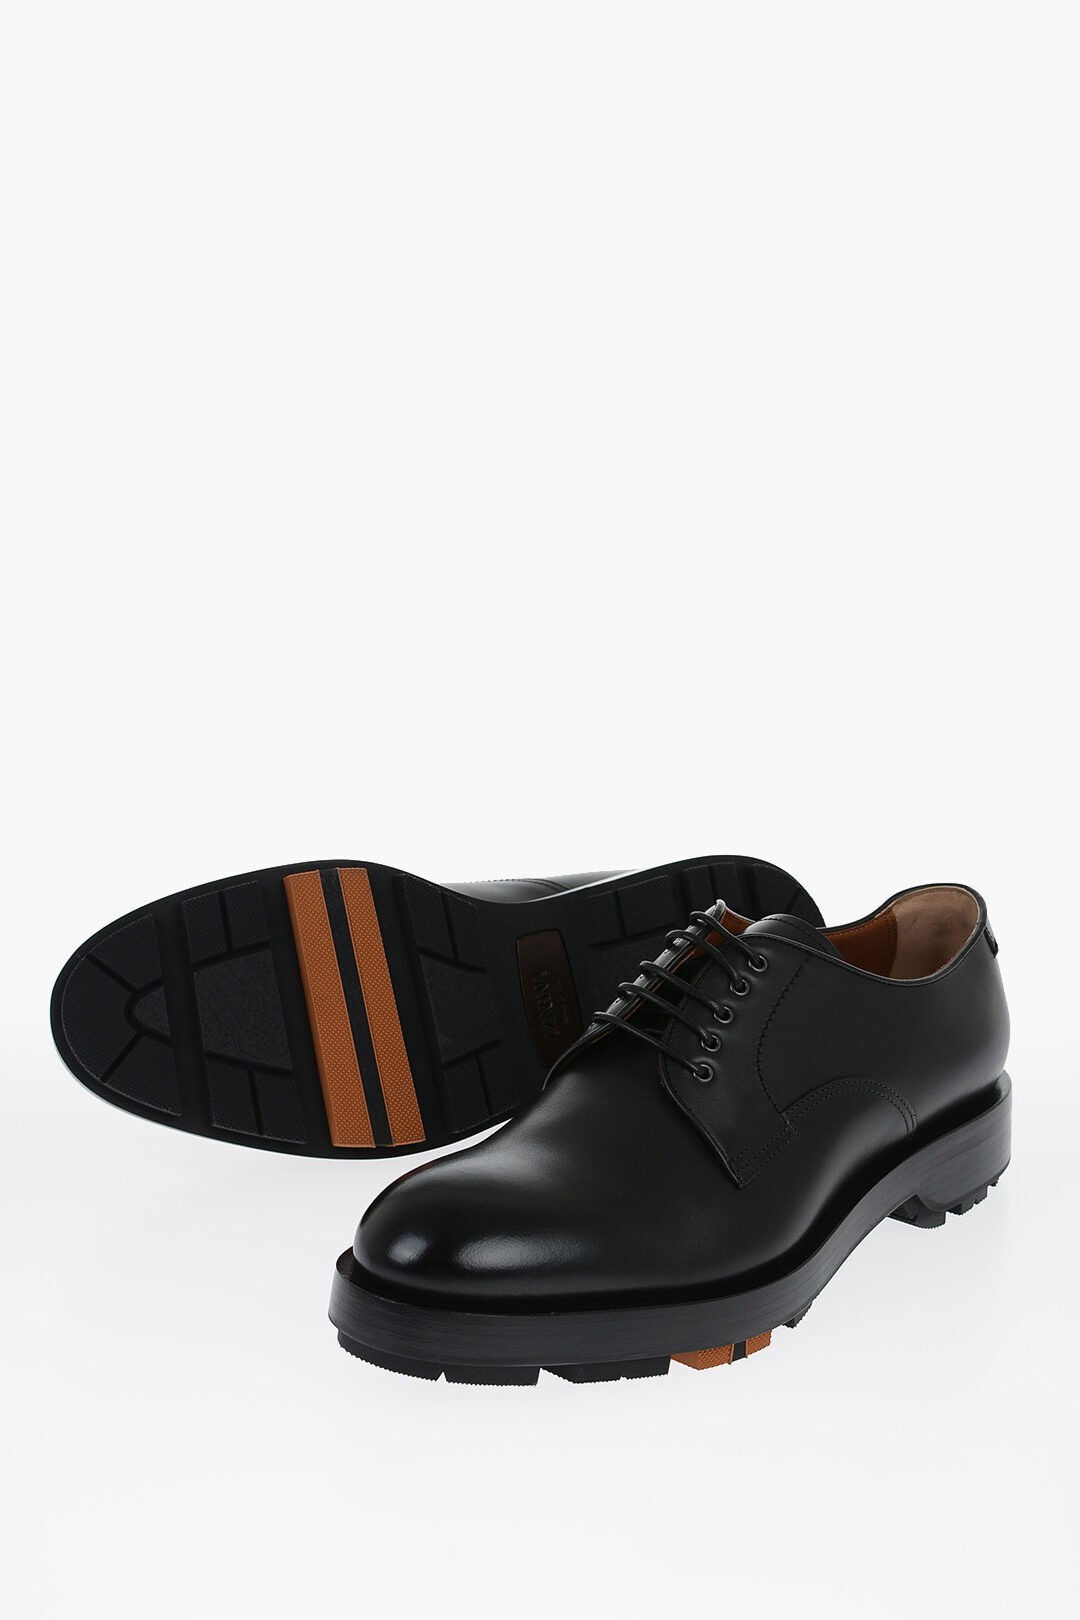 ZEGNA ゼニア ドレスシューズ LHCLG A5434Z NER メンズ LEATHER UDINE DERBY SHOES 【関税 送料無料】【ラッピング無料】 dk